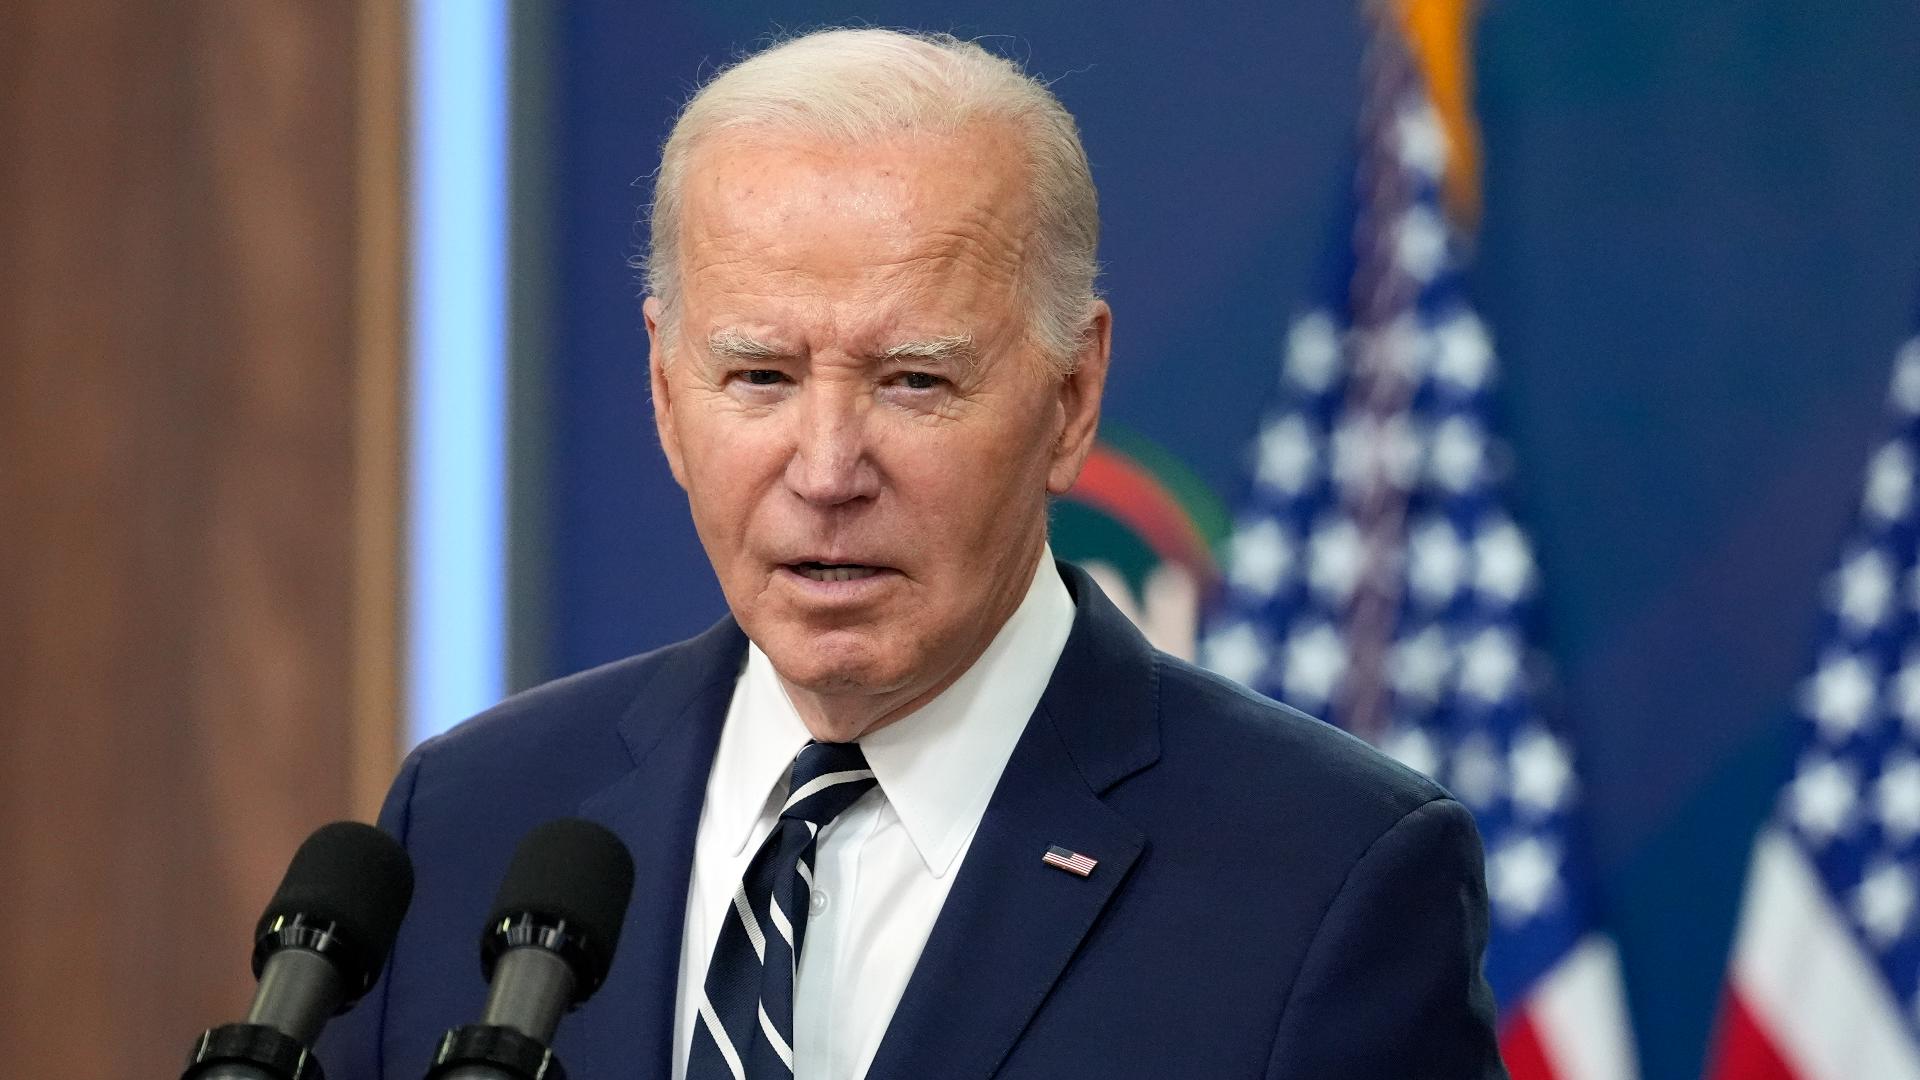 There are three options to get President Joe Biden on the Ohio ballot if the state legislature doesn't act by midnight.